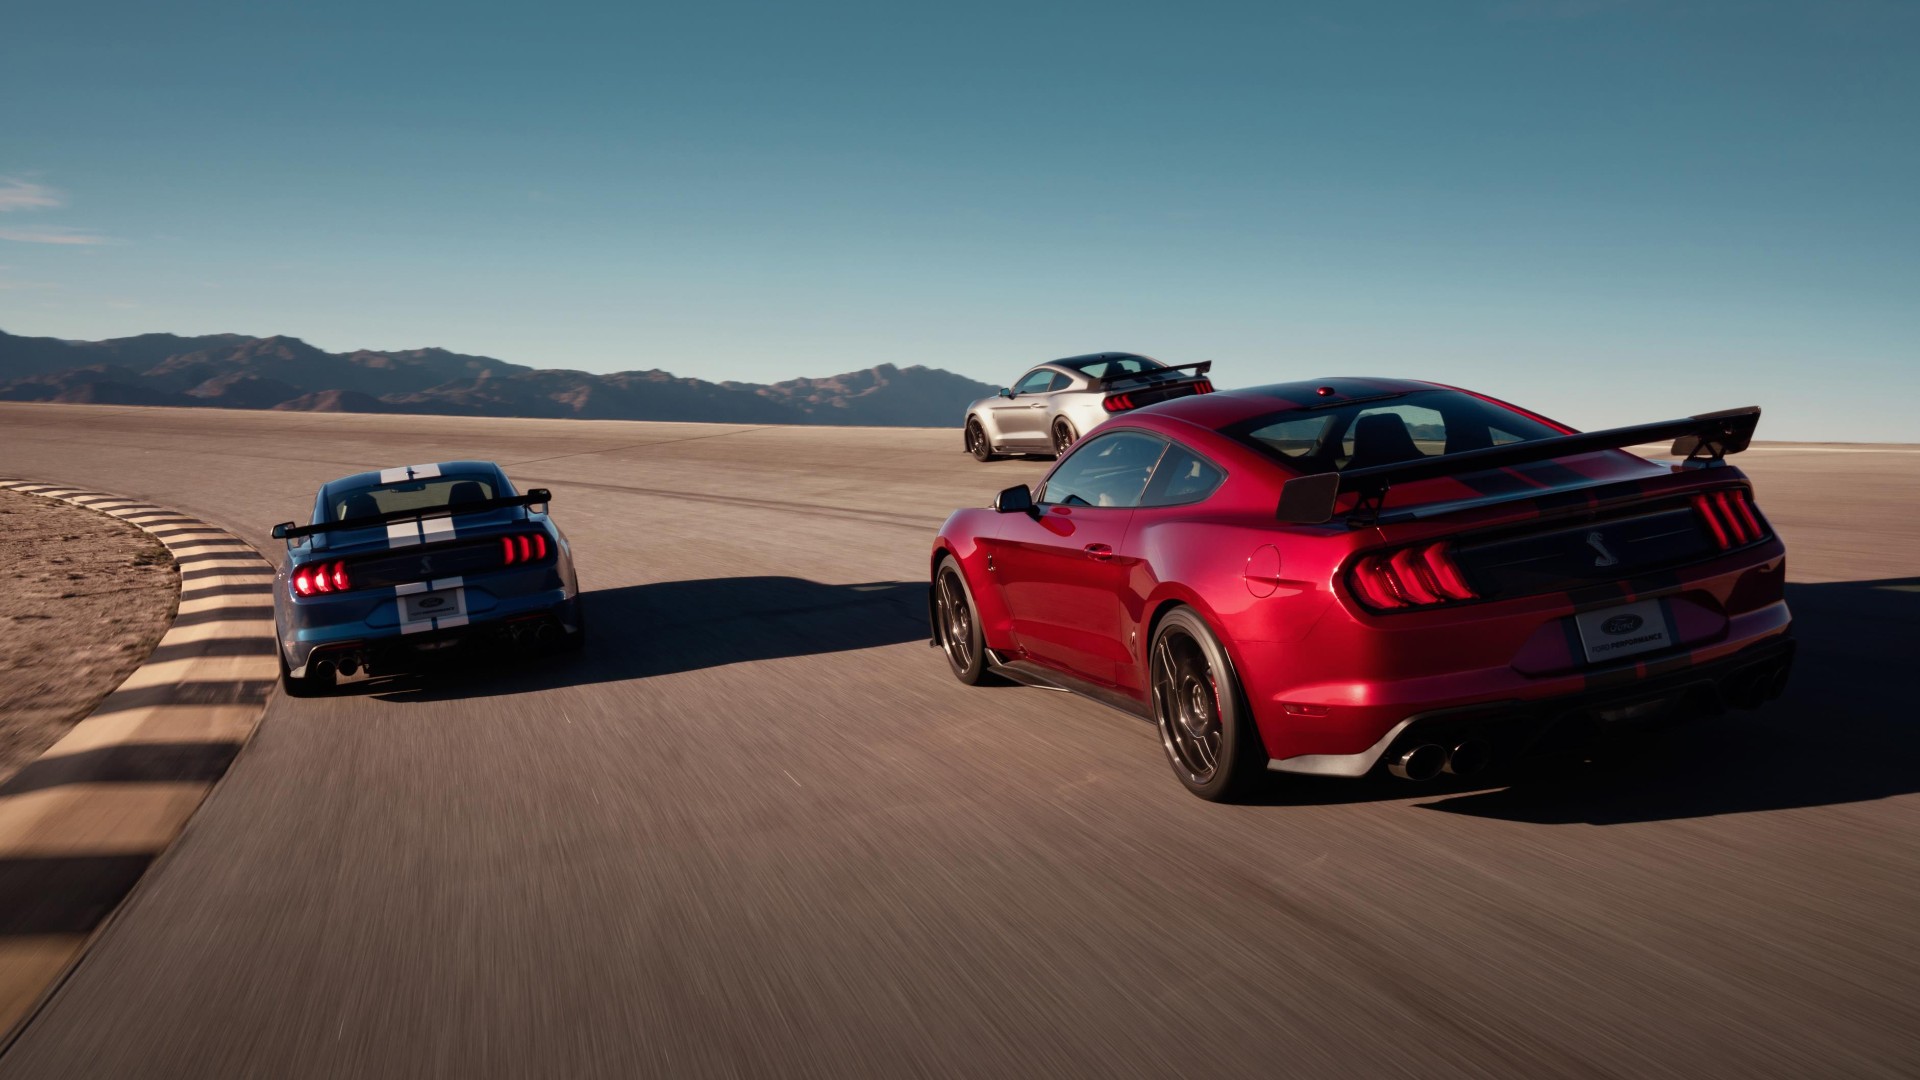 Shelby Mustang GT500 power revealed